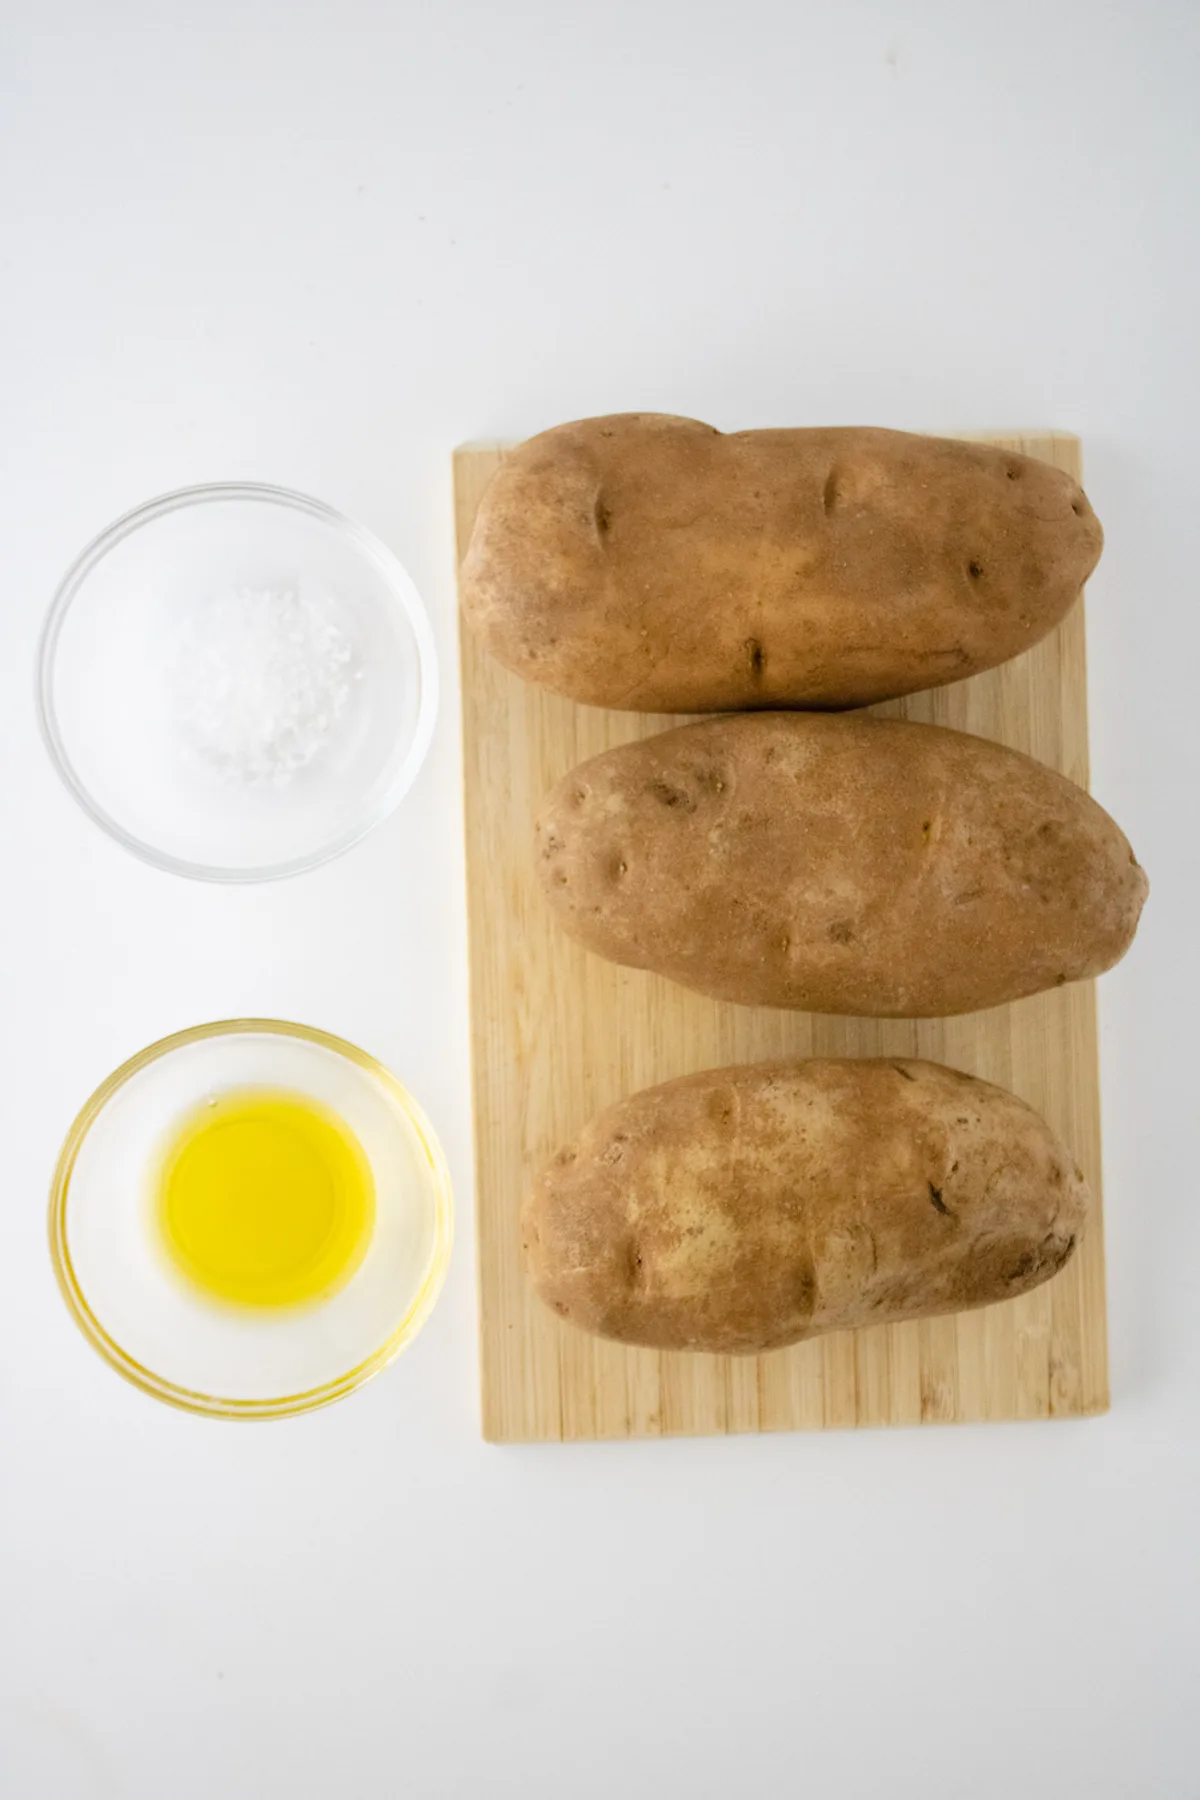 easy ingredients for air fryer baked potatoes, russet potatoes, salt, and oil